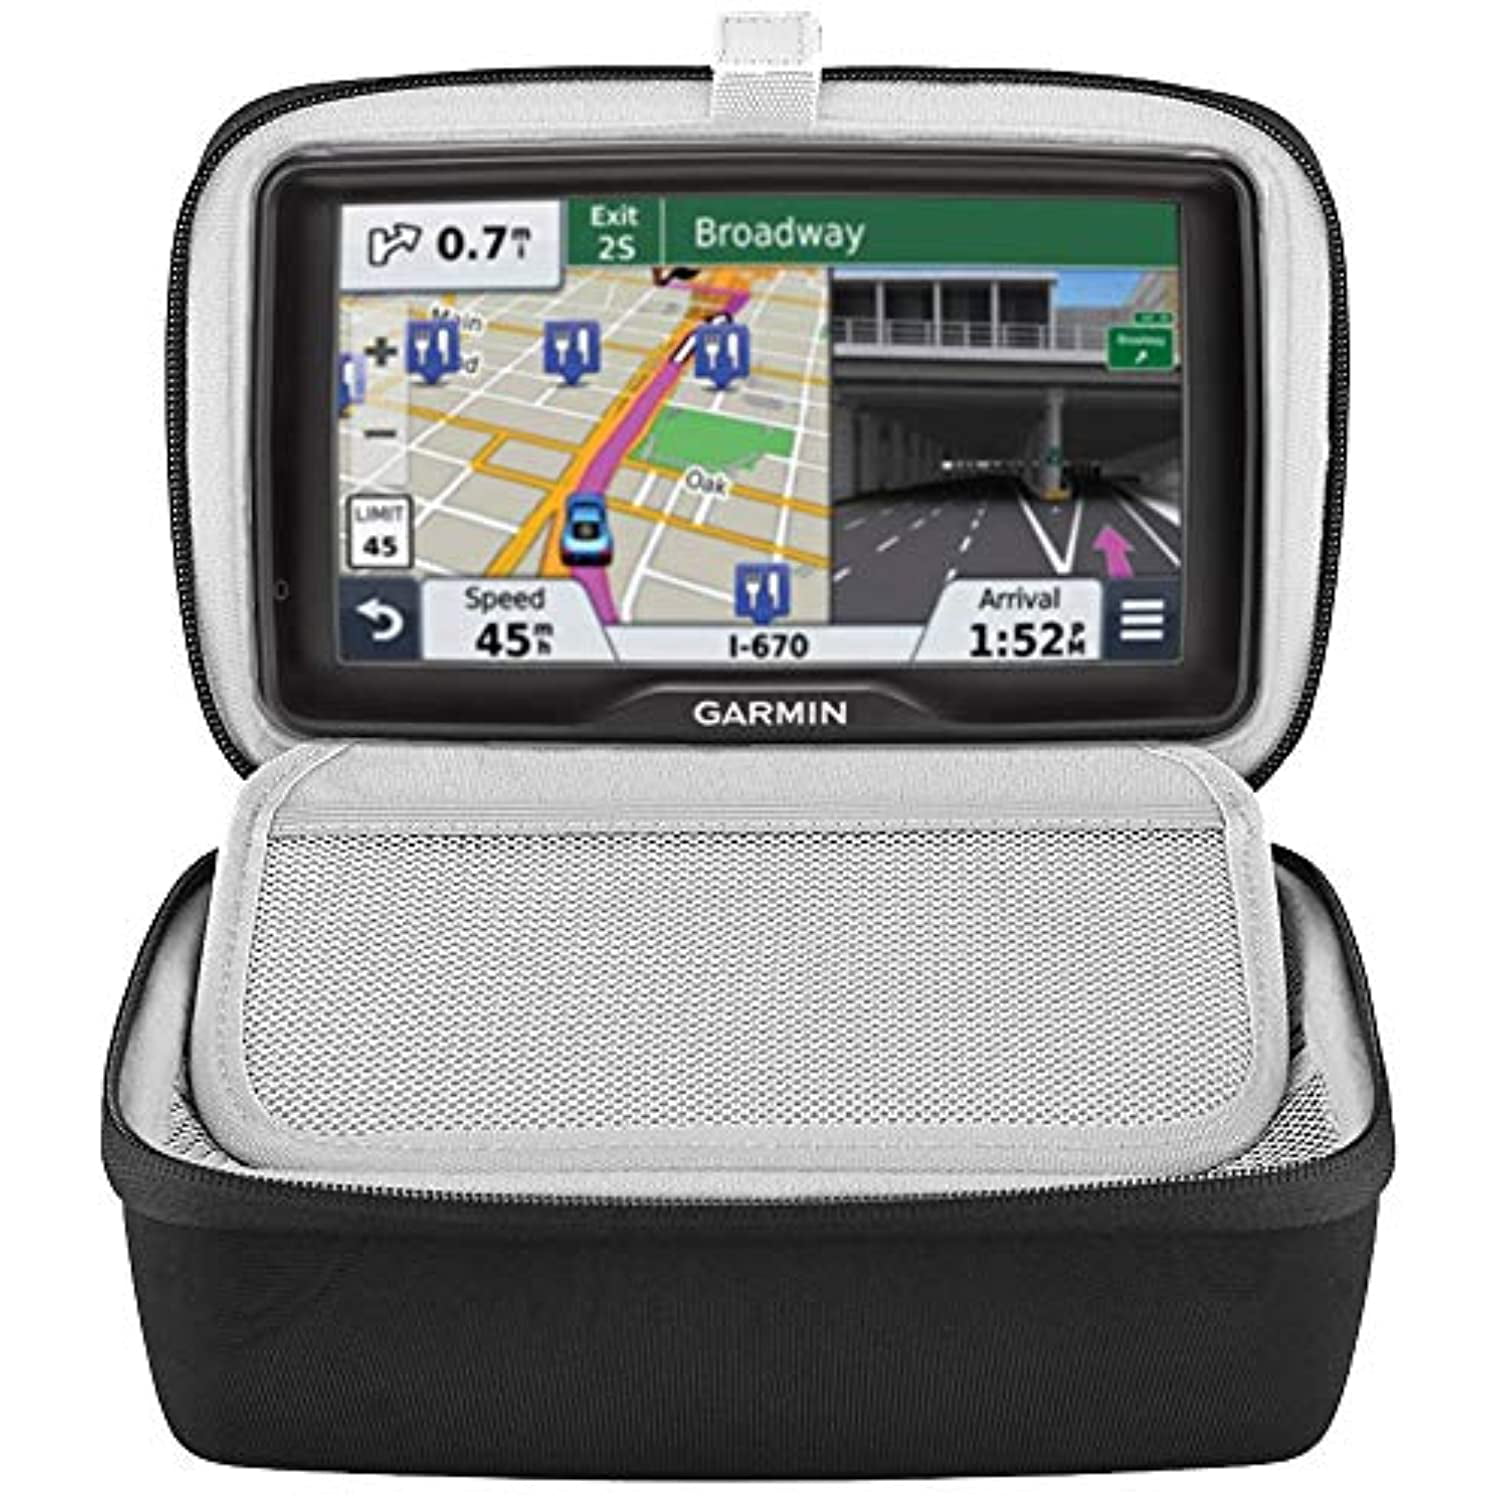 5.2 Inch Hard Carrying Storage Travel Case Bag GPS Cover for Tomtom Garmin Nuvi 